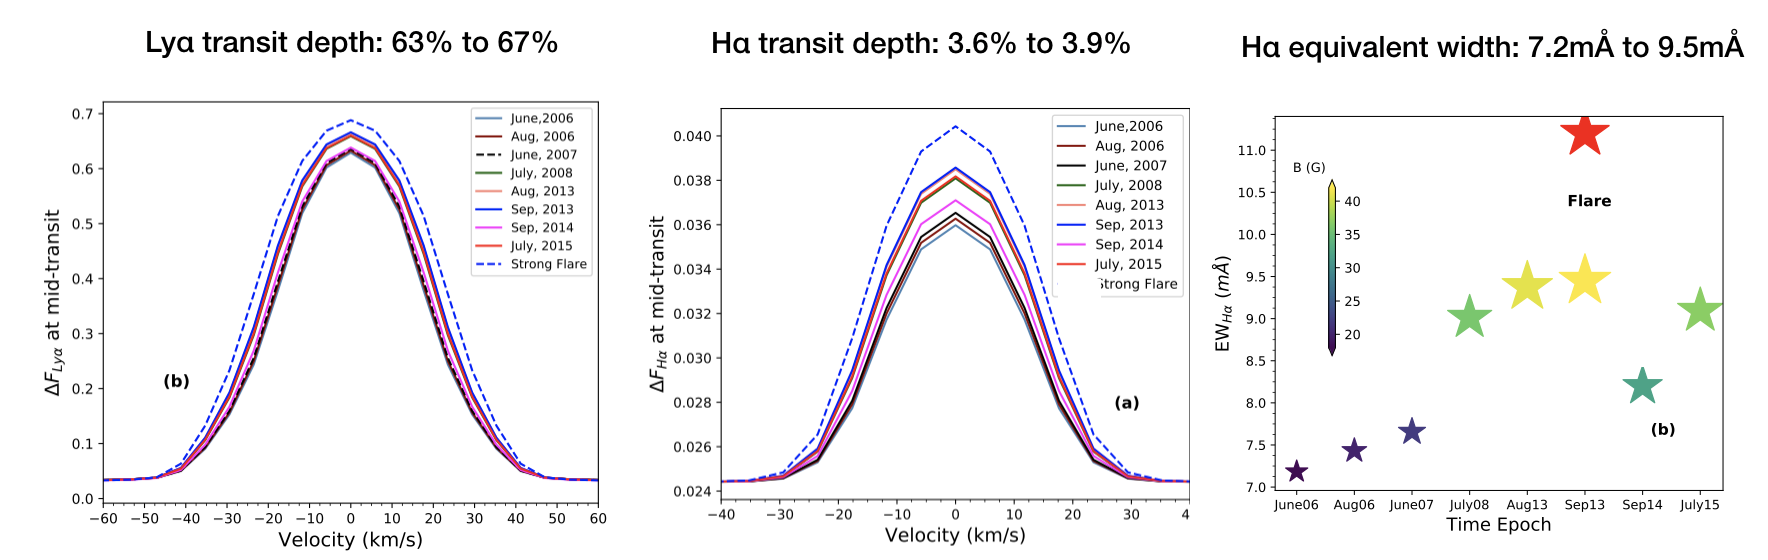  Left: Transit depth of the Ly α line at mid-transit as a function of Doppler velocity over magnetic cycle, Middle: Transit depth of Hα line over the same magnetic cycle and Right: the equivalent widths are plotted at the same epoch. The colors in the Equivalent width plots are associated with the magnitudes of the magnetic field that are shown in the colorbar, except for the flare case, shown in red.